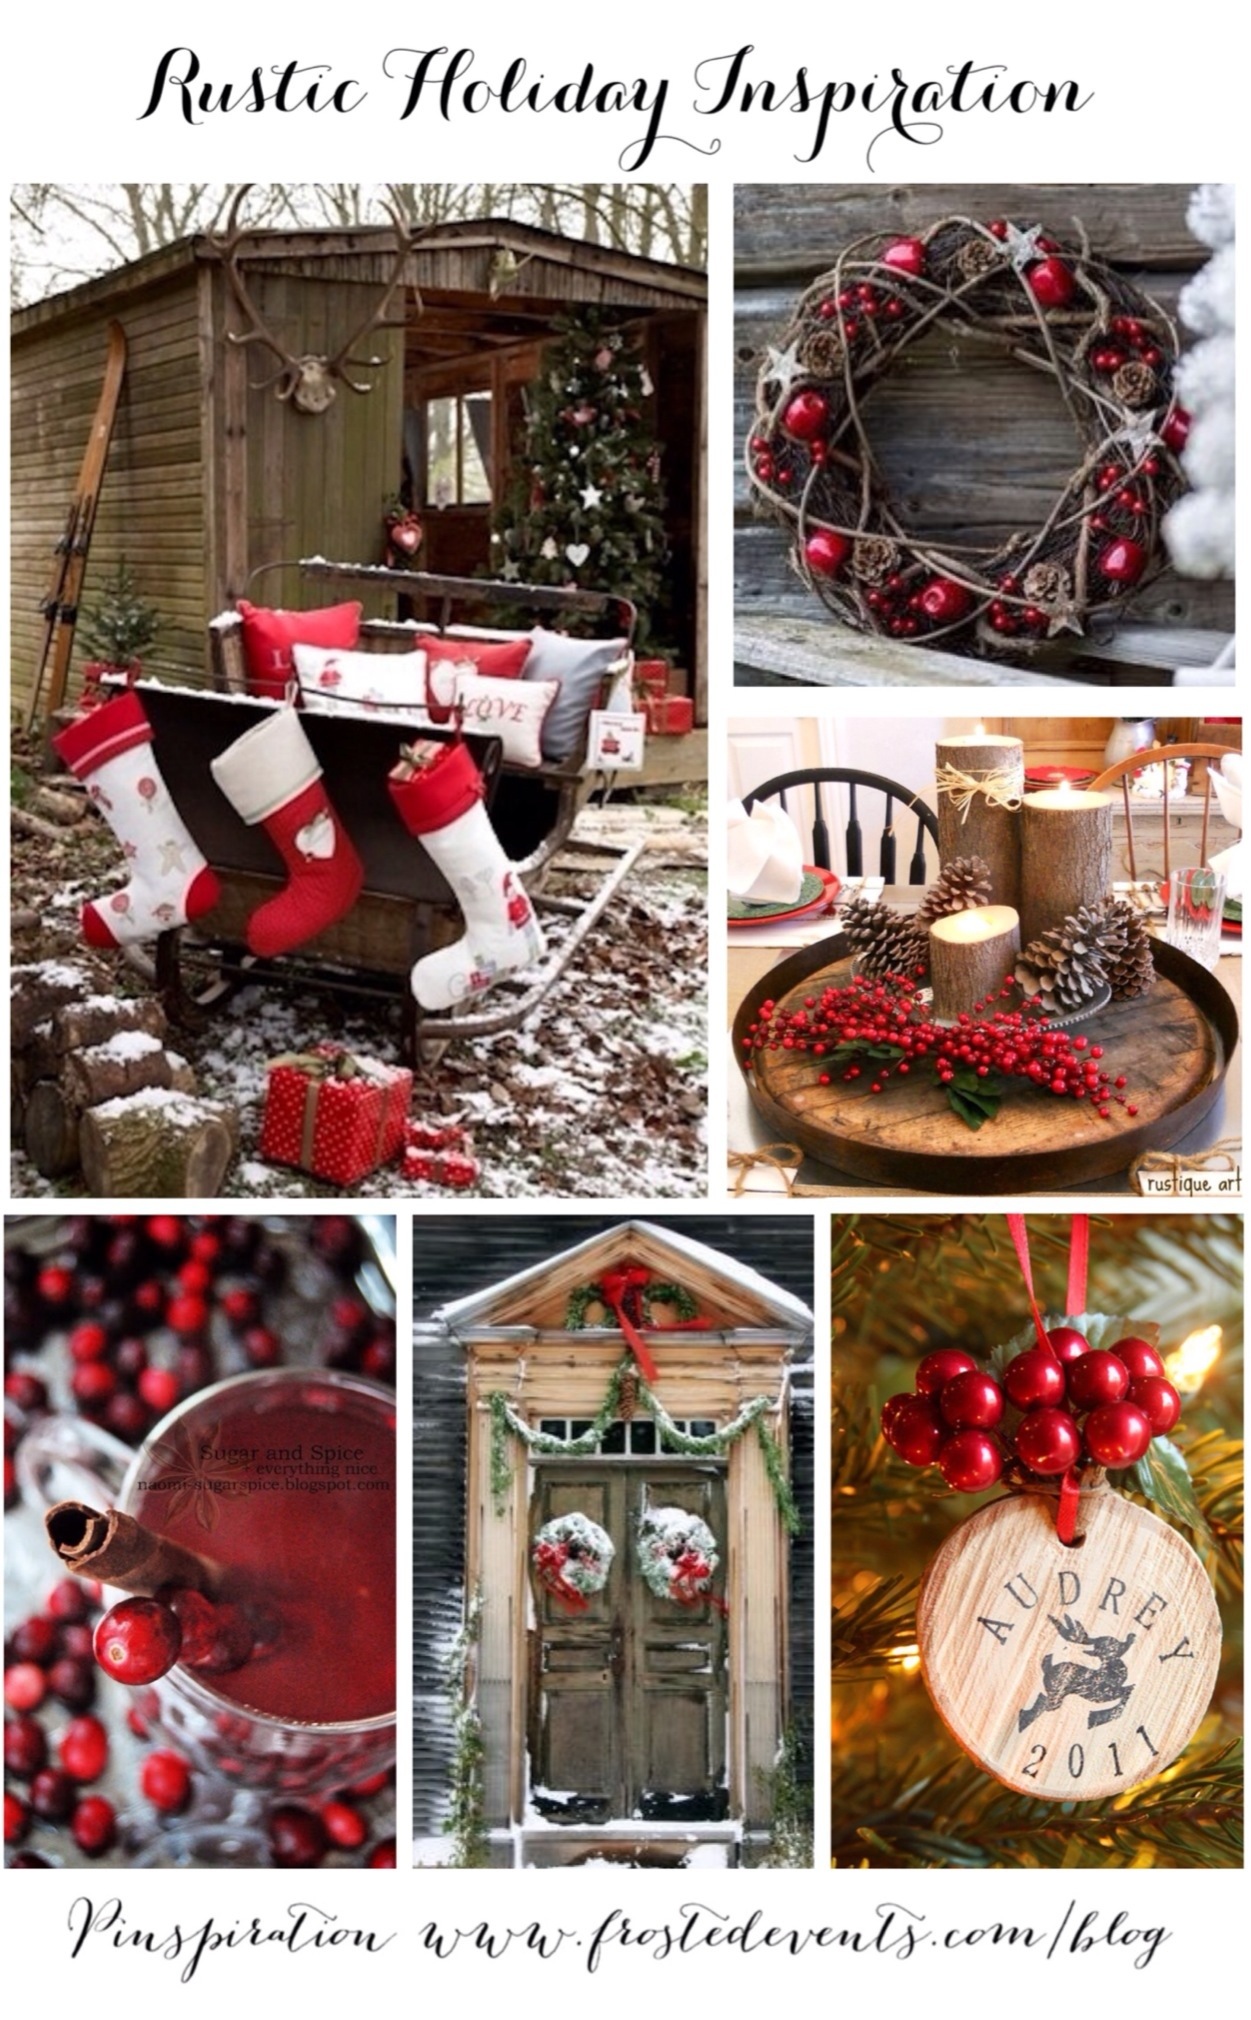 Rustic Holiday Inspiration www.frostedevents.com Christmas Ideas